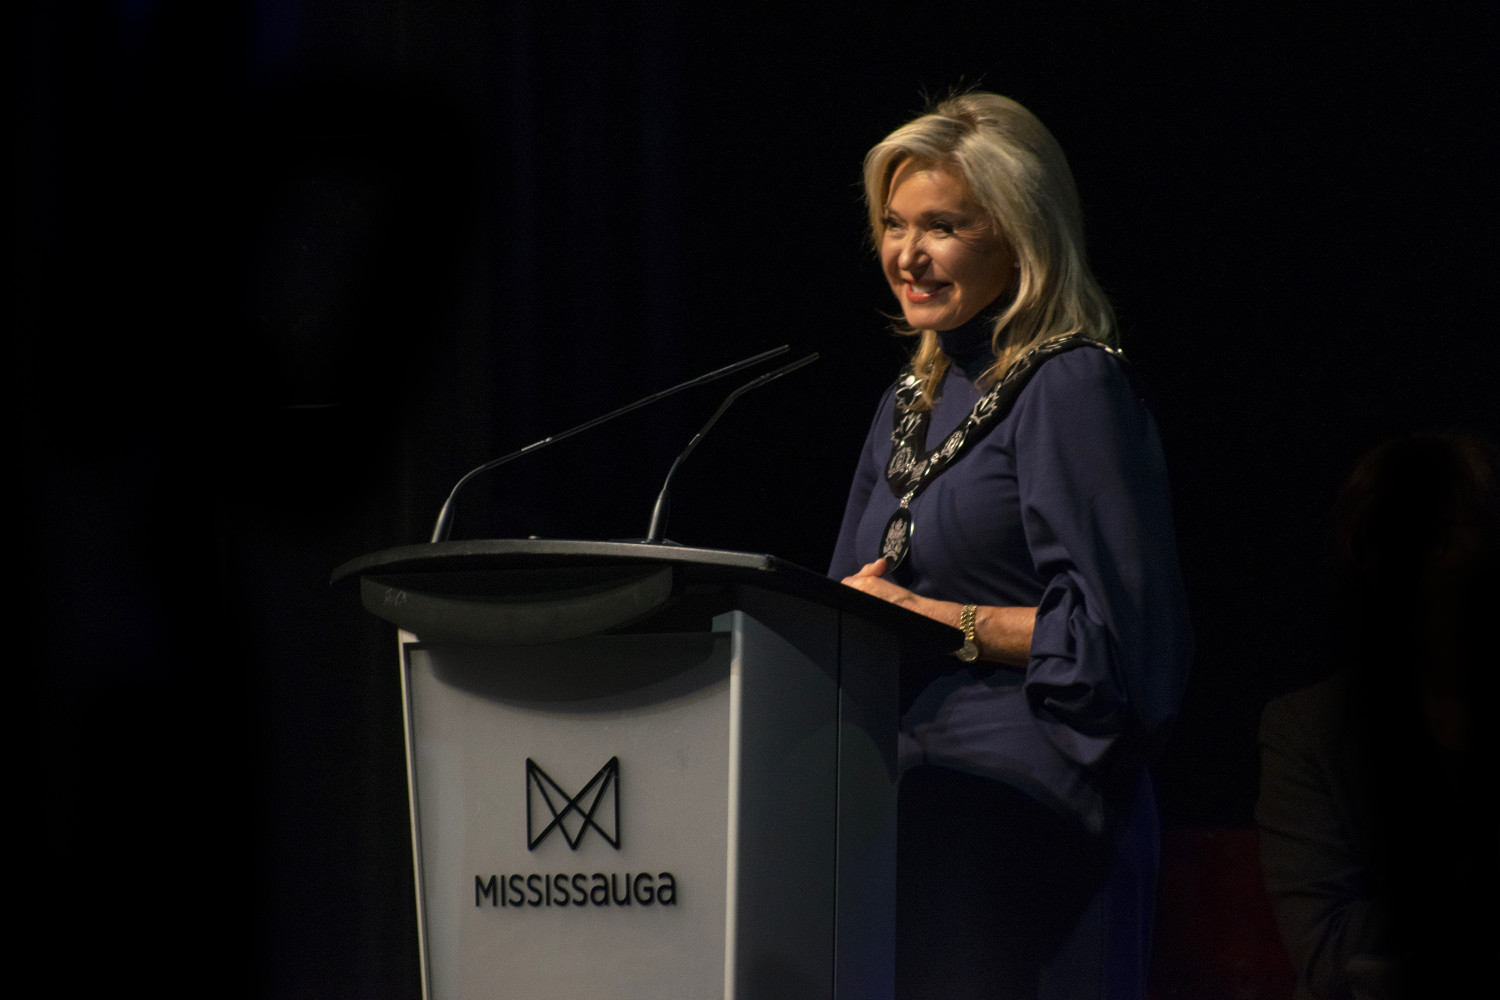 Bonnie Crombie—the ‘Queen of Green’—leaves big shoes to fill after transitioning Mississauga toward a sustainable future